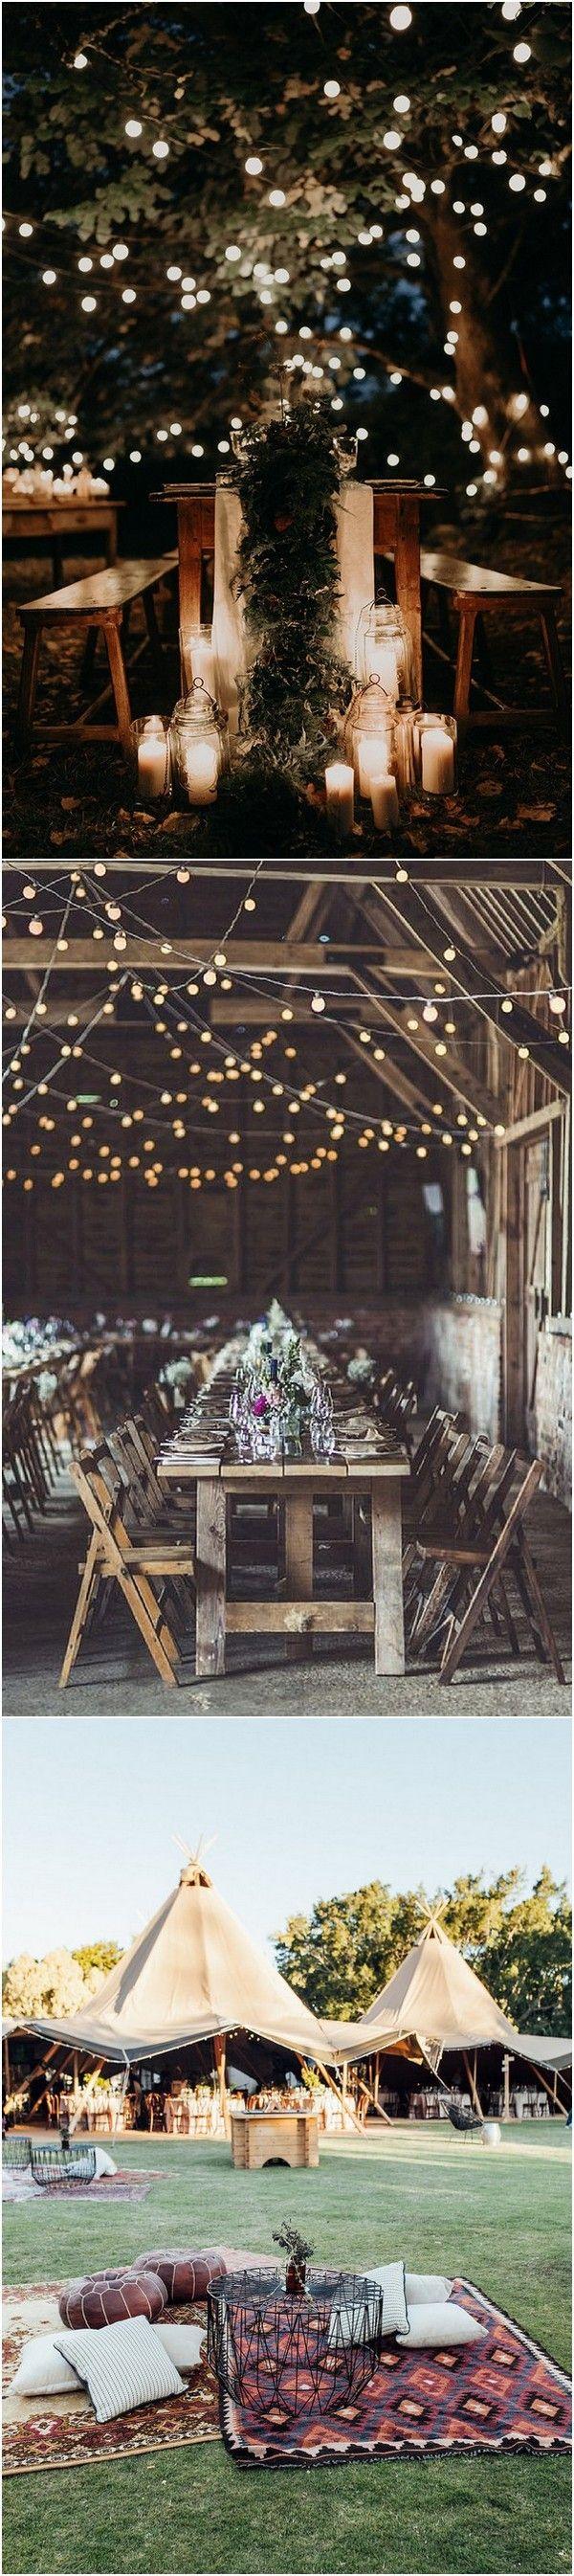 Wedding - Trending-30 Boho Chic Wedding Ideas For 2018 - Page 2 Of 3